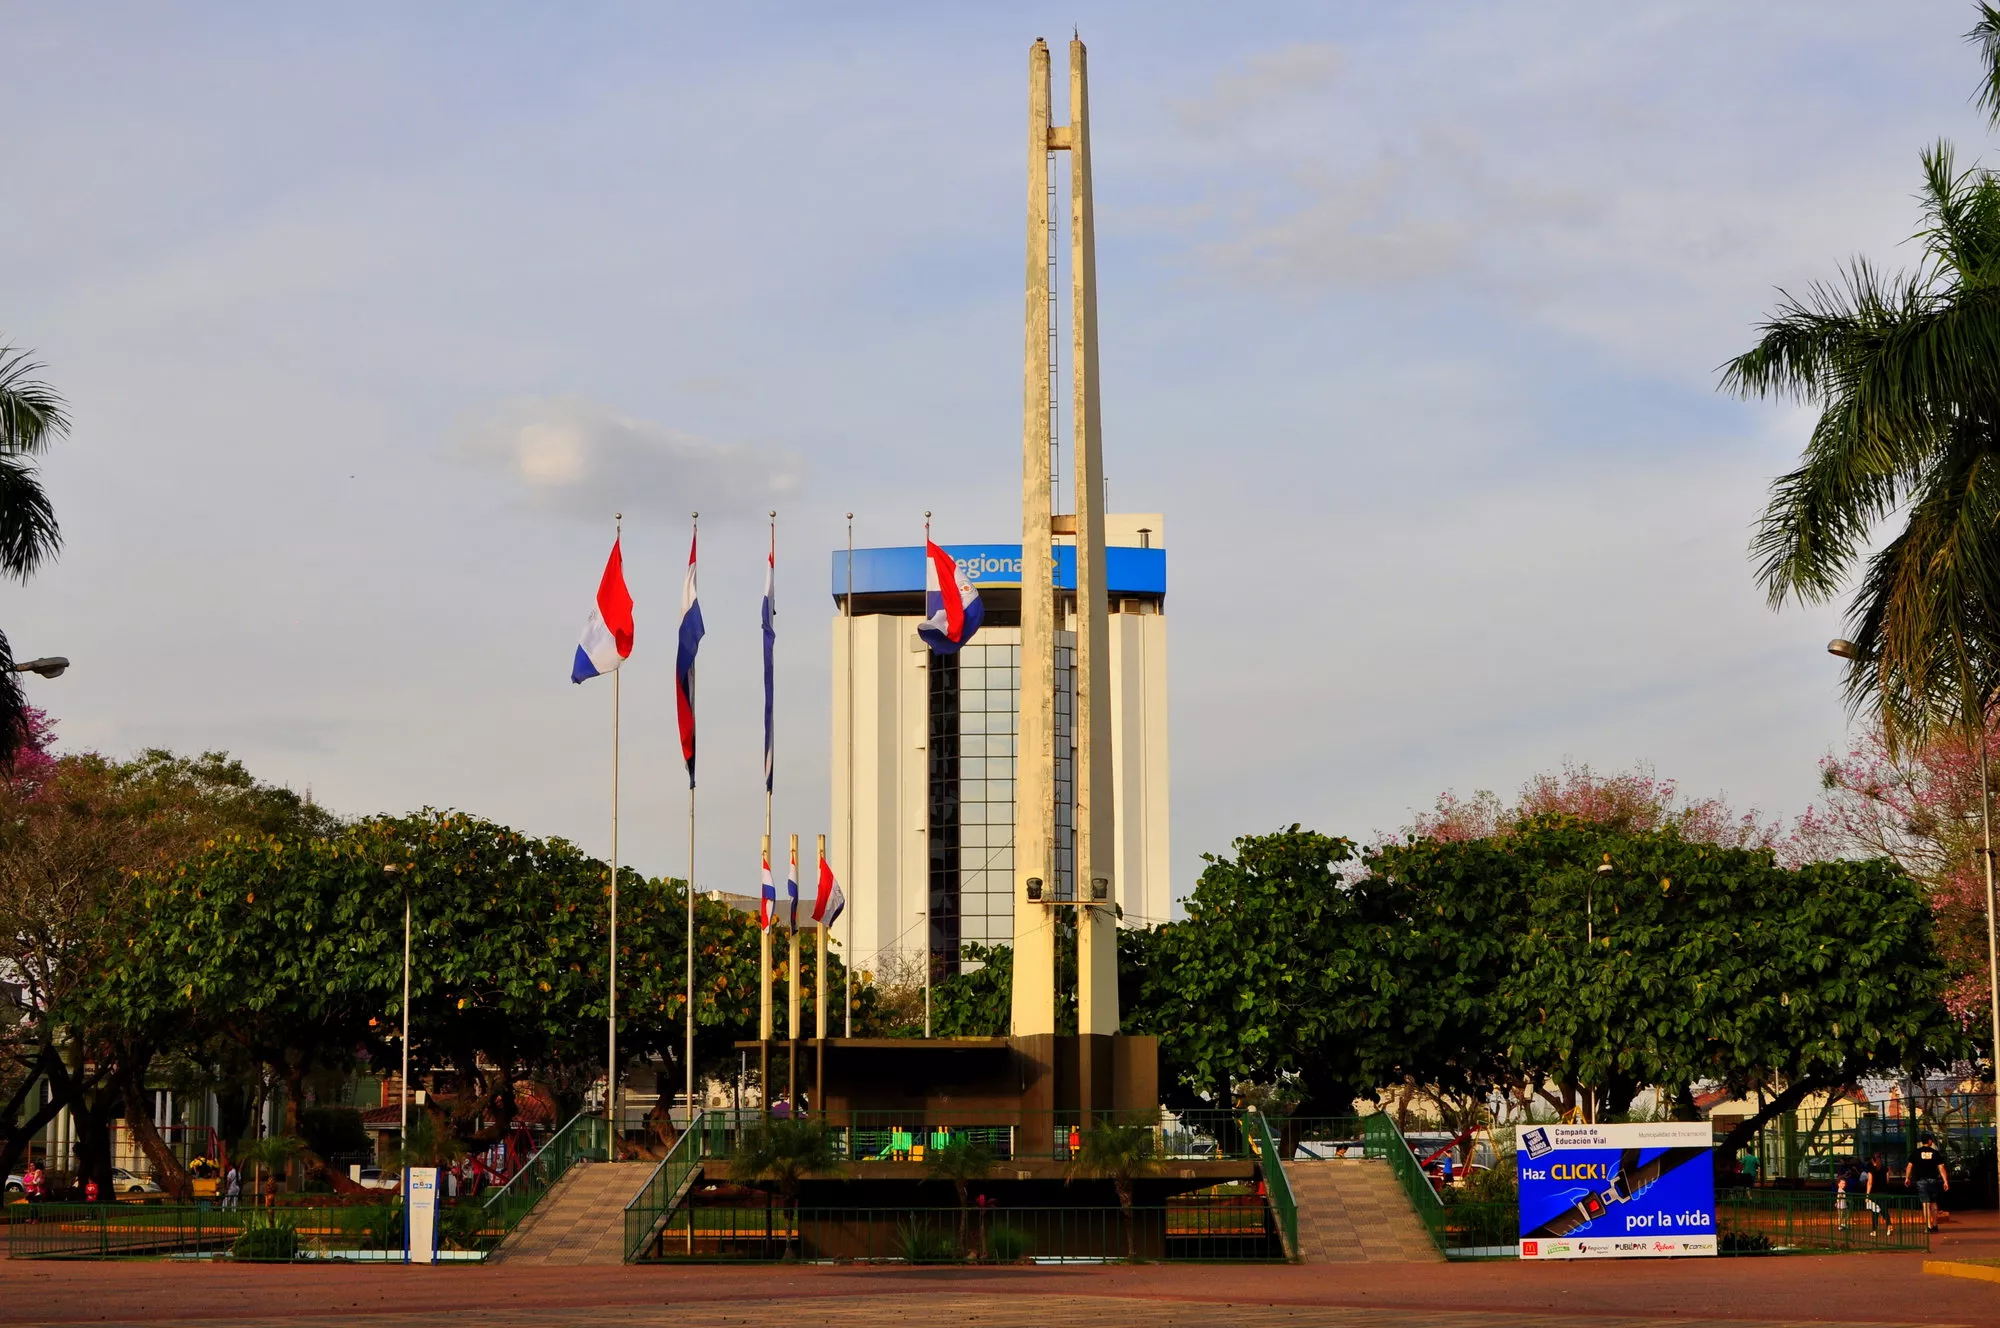 Plaza de Armas in Paraguay, South America | Parks - Rated 3.6